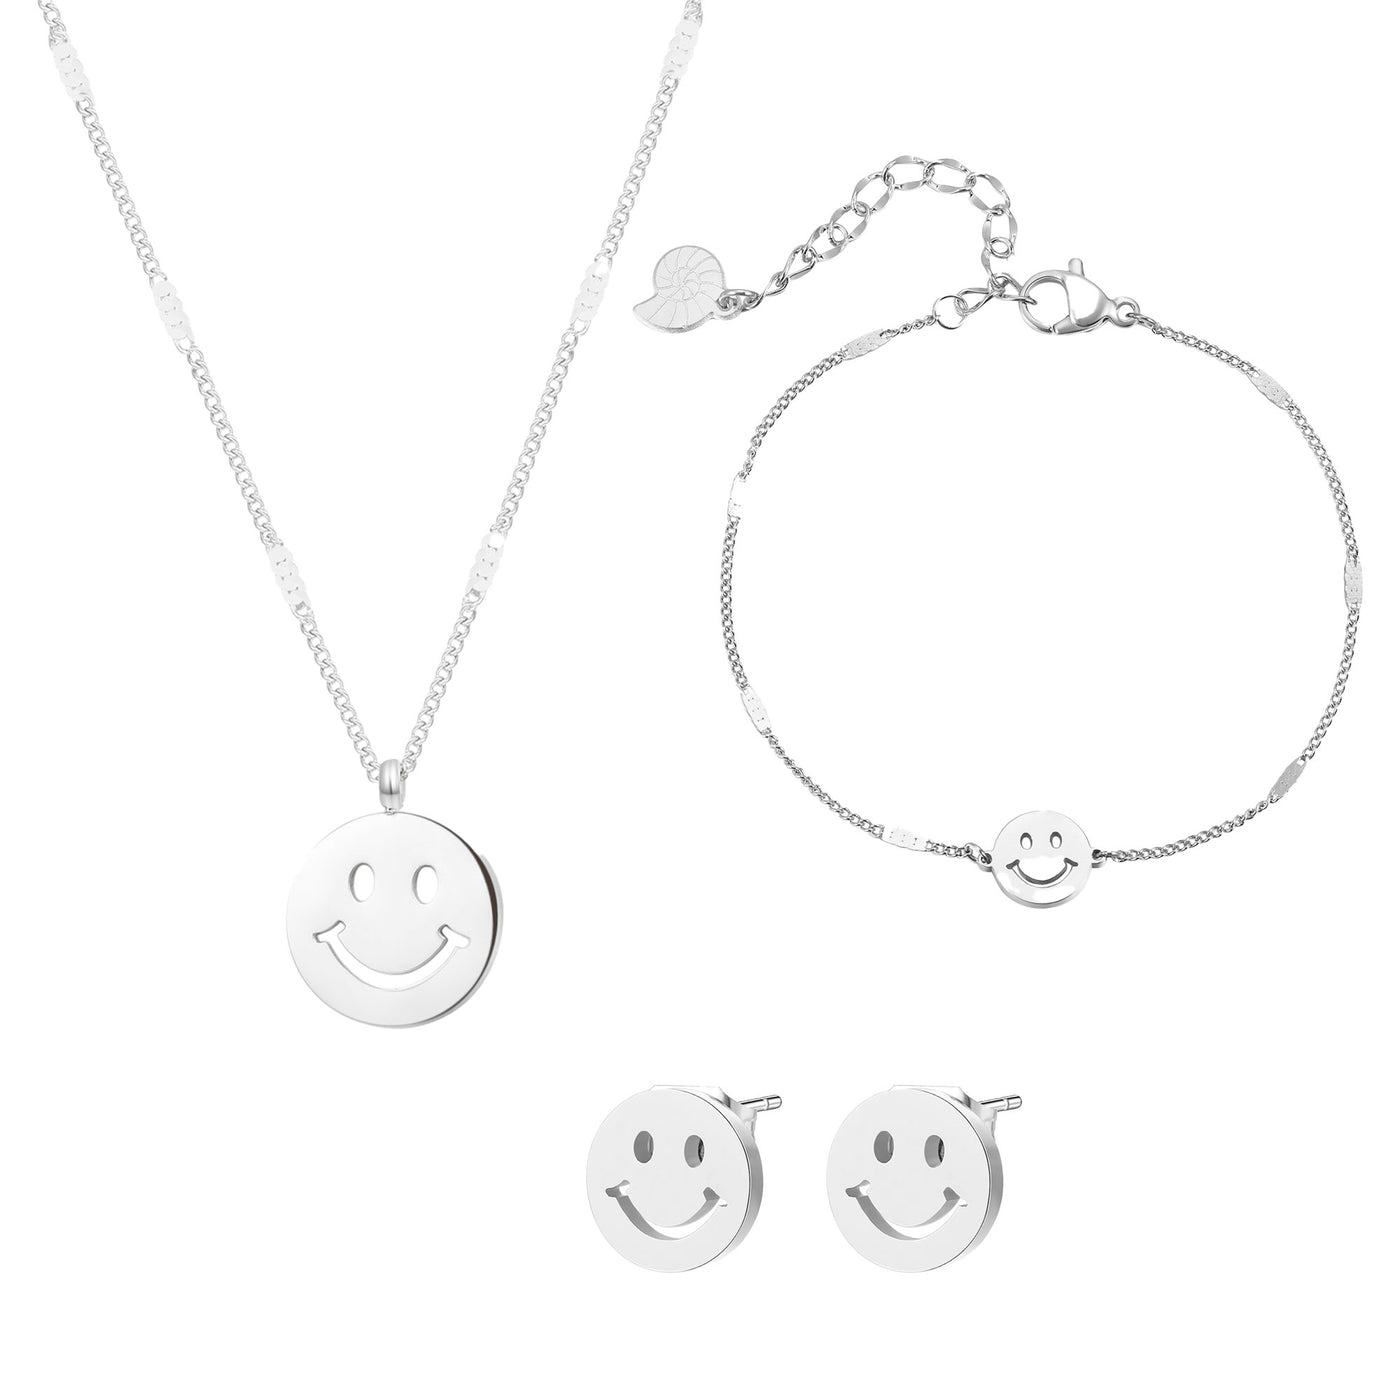 Smiley Set in Silver